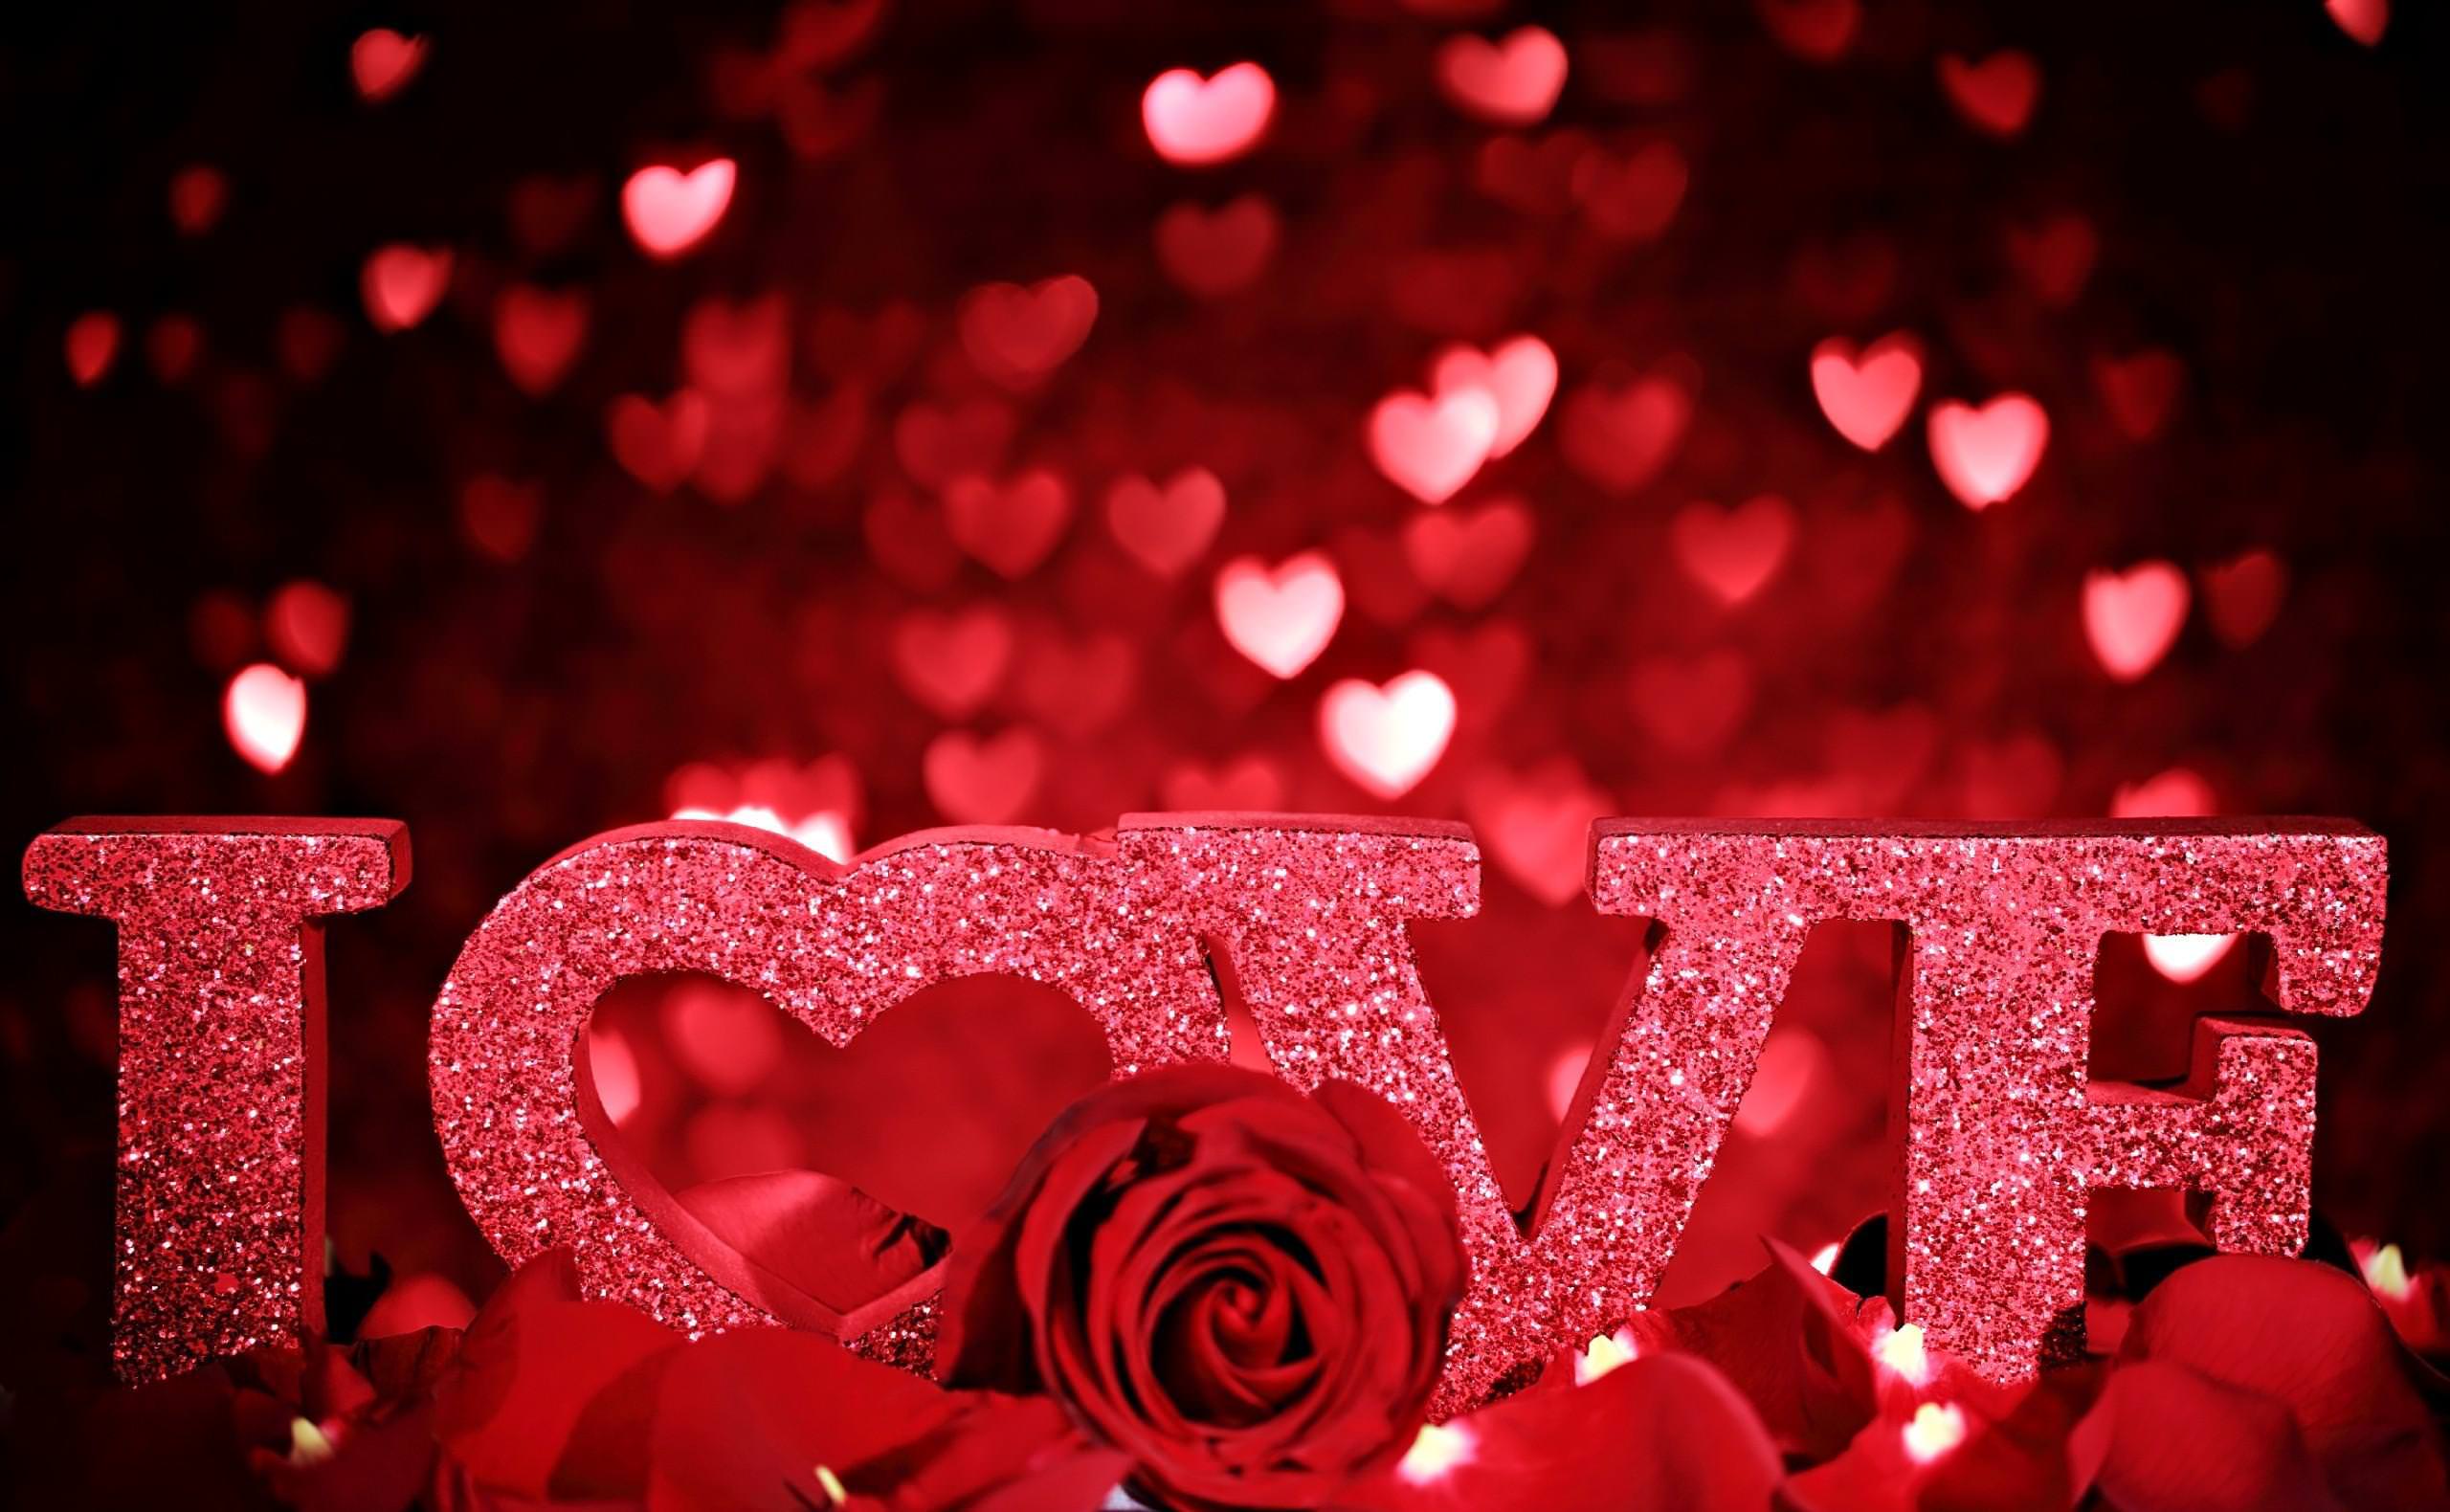 Glittery Love Symbol on Red Color Background